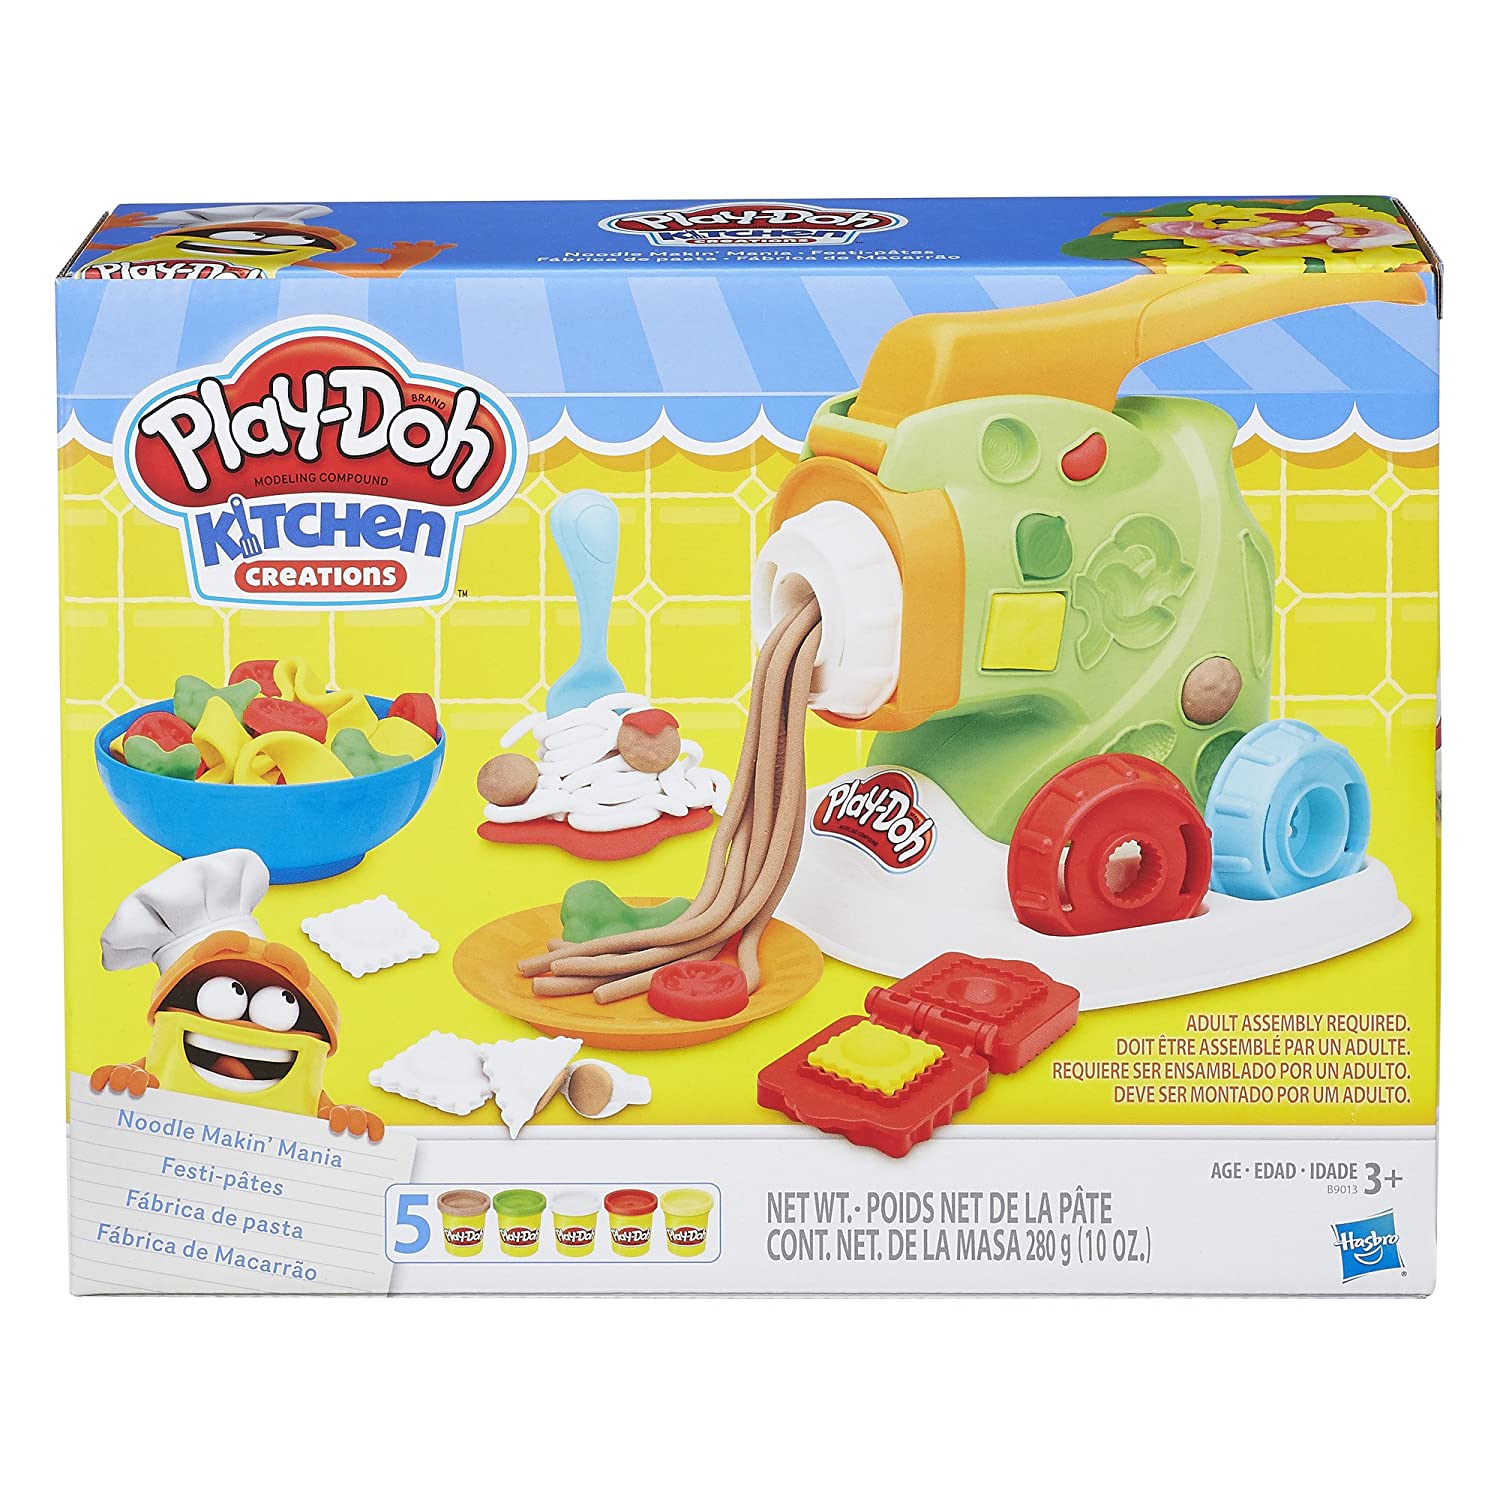 Top 8 Best Play Dough Sets for Boys Reviews in 2022 8